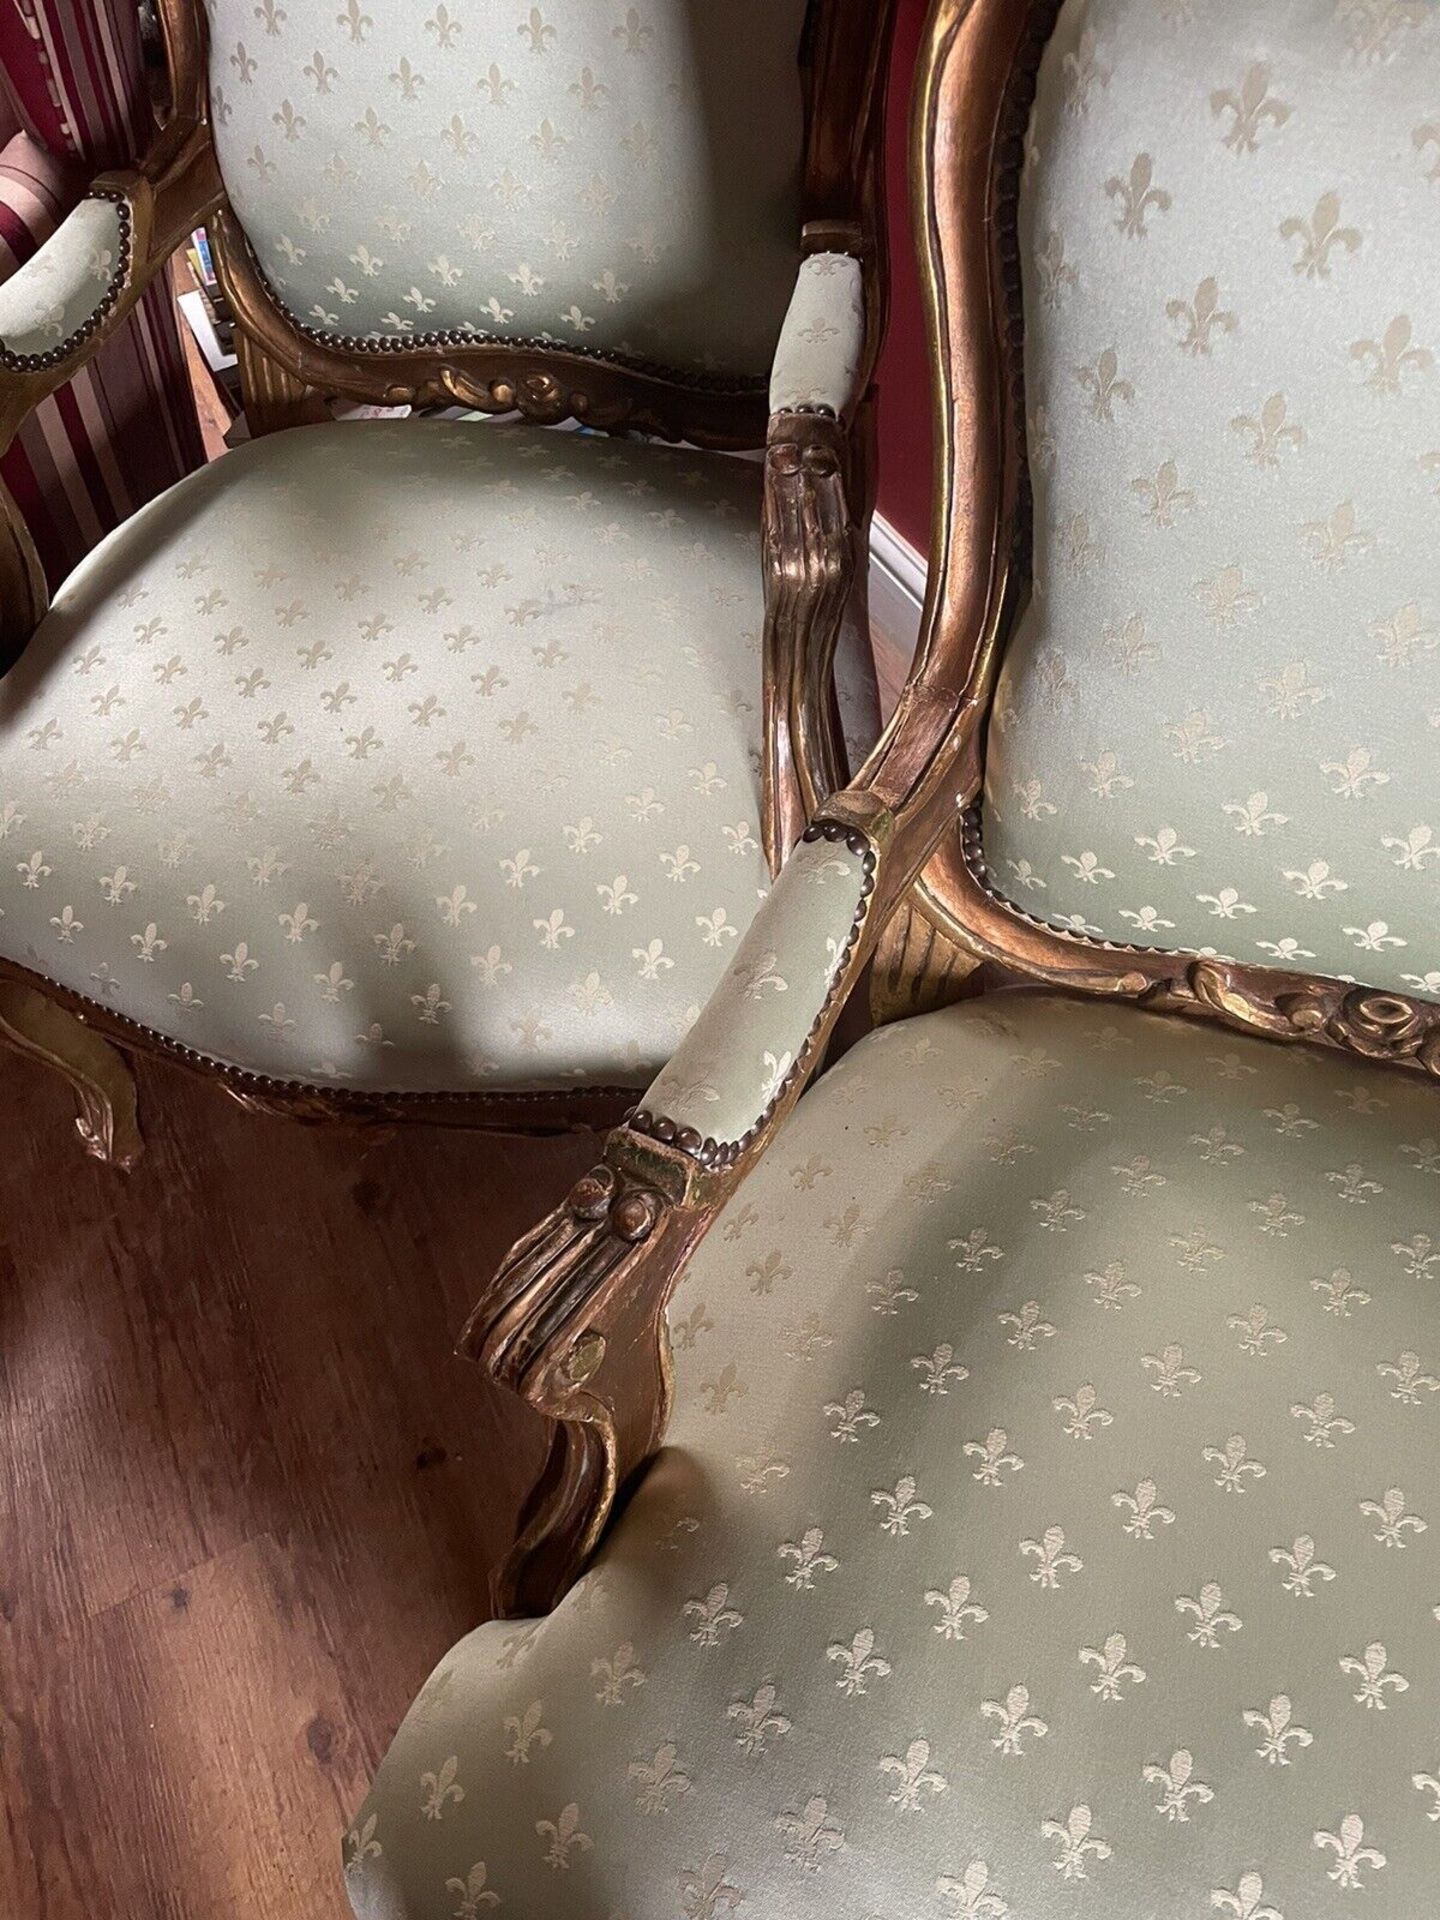 A Pair of Fauteuils In Louis XVI Style Carved Gilt Wood Arm Chairs Upholstered In Fleur De Lys - Image 6 of 10